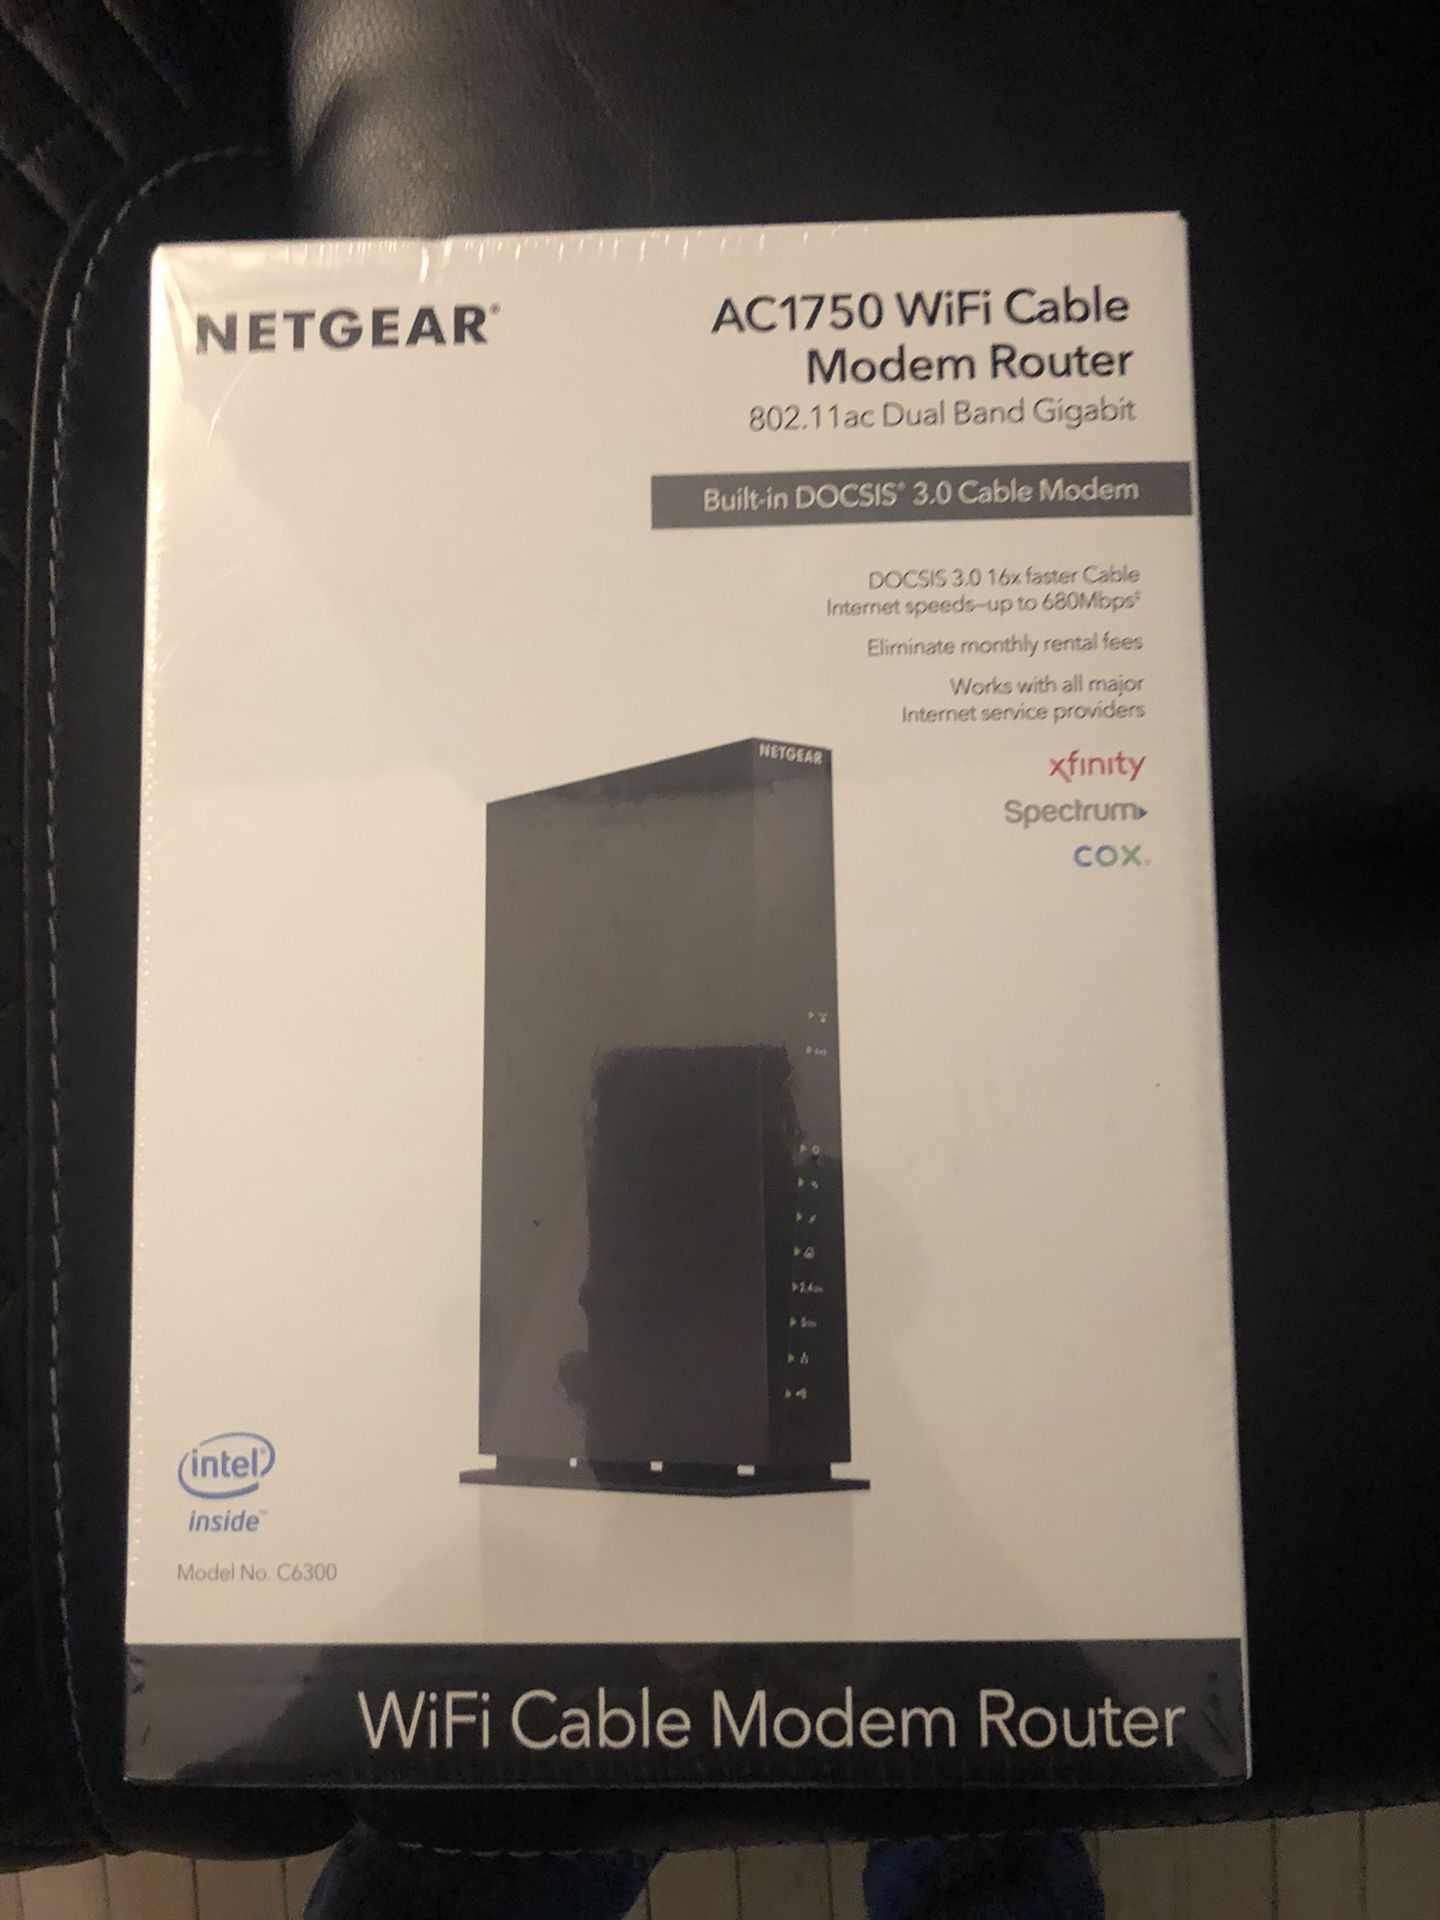 Net gear Ac1750 WiFi cable Modem Router (Brand New)